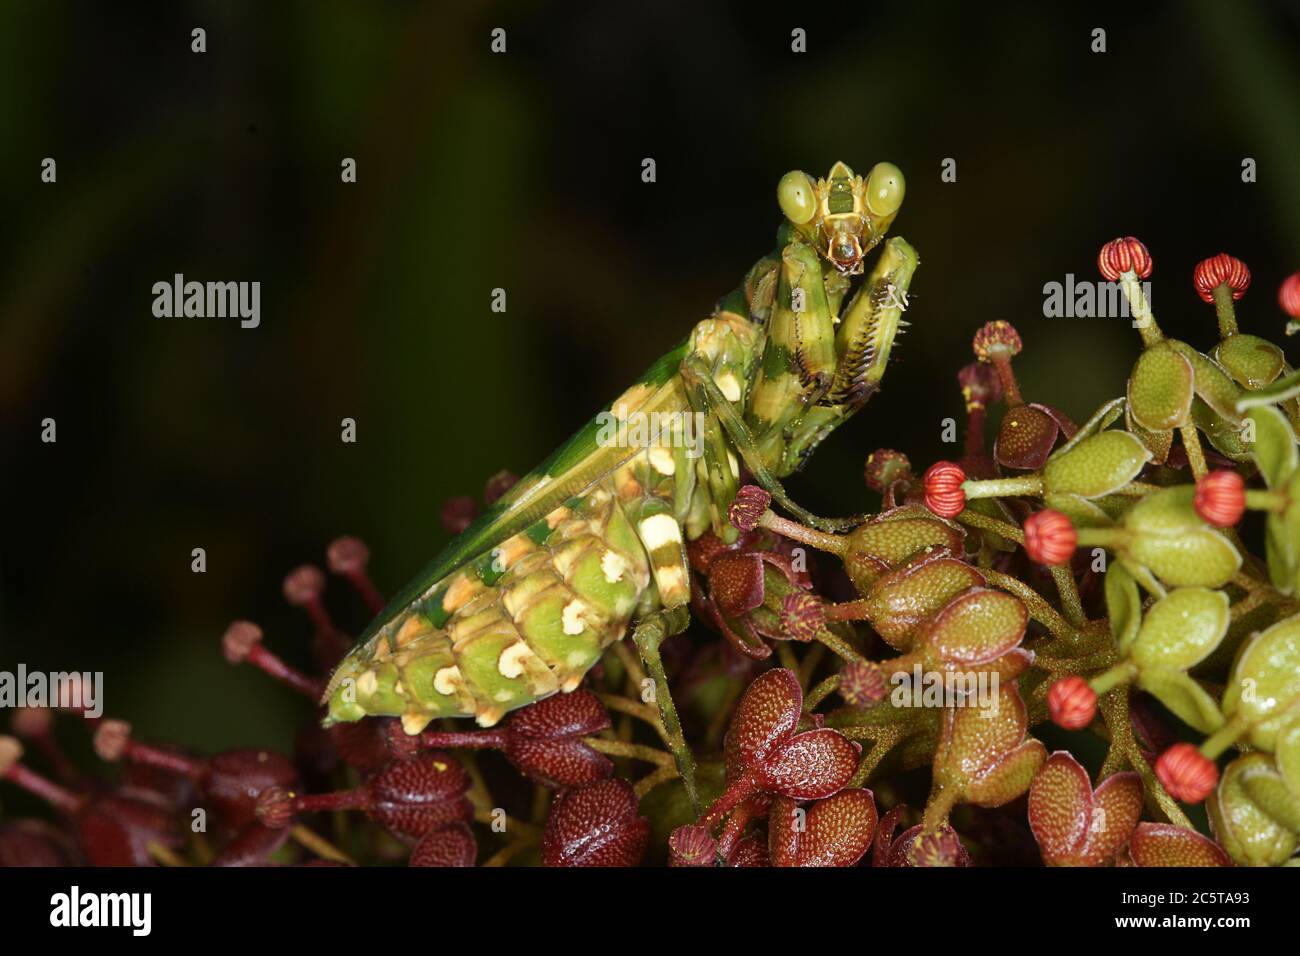 Banded flower mantis (Theopropus elegans), on Nepenthes flower, Borneo/Malaysia Stock Photo